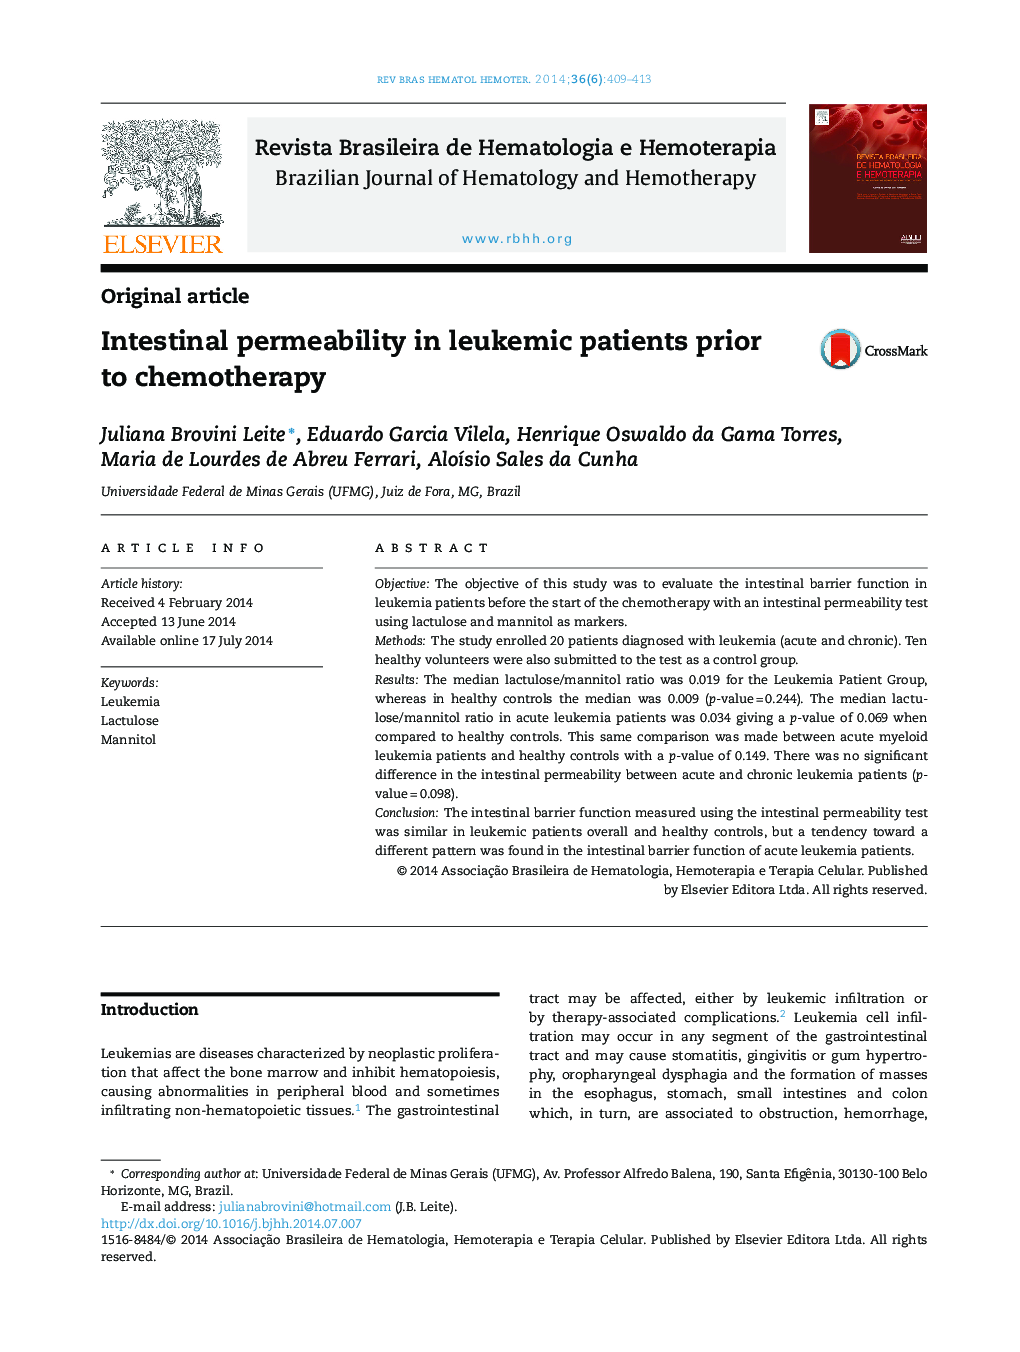 Intestinal permeability in leukemic patients prior to chemotherapy